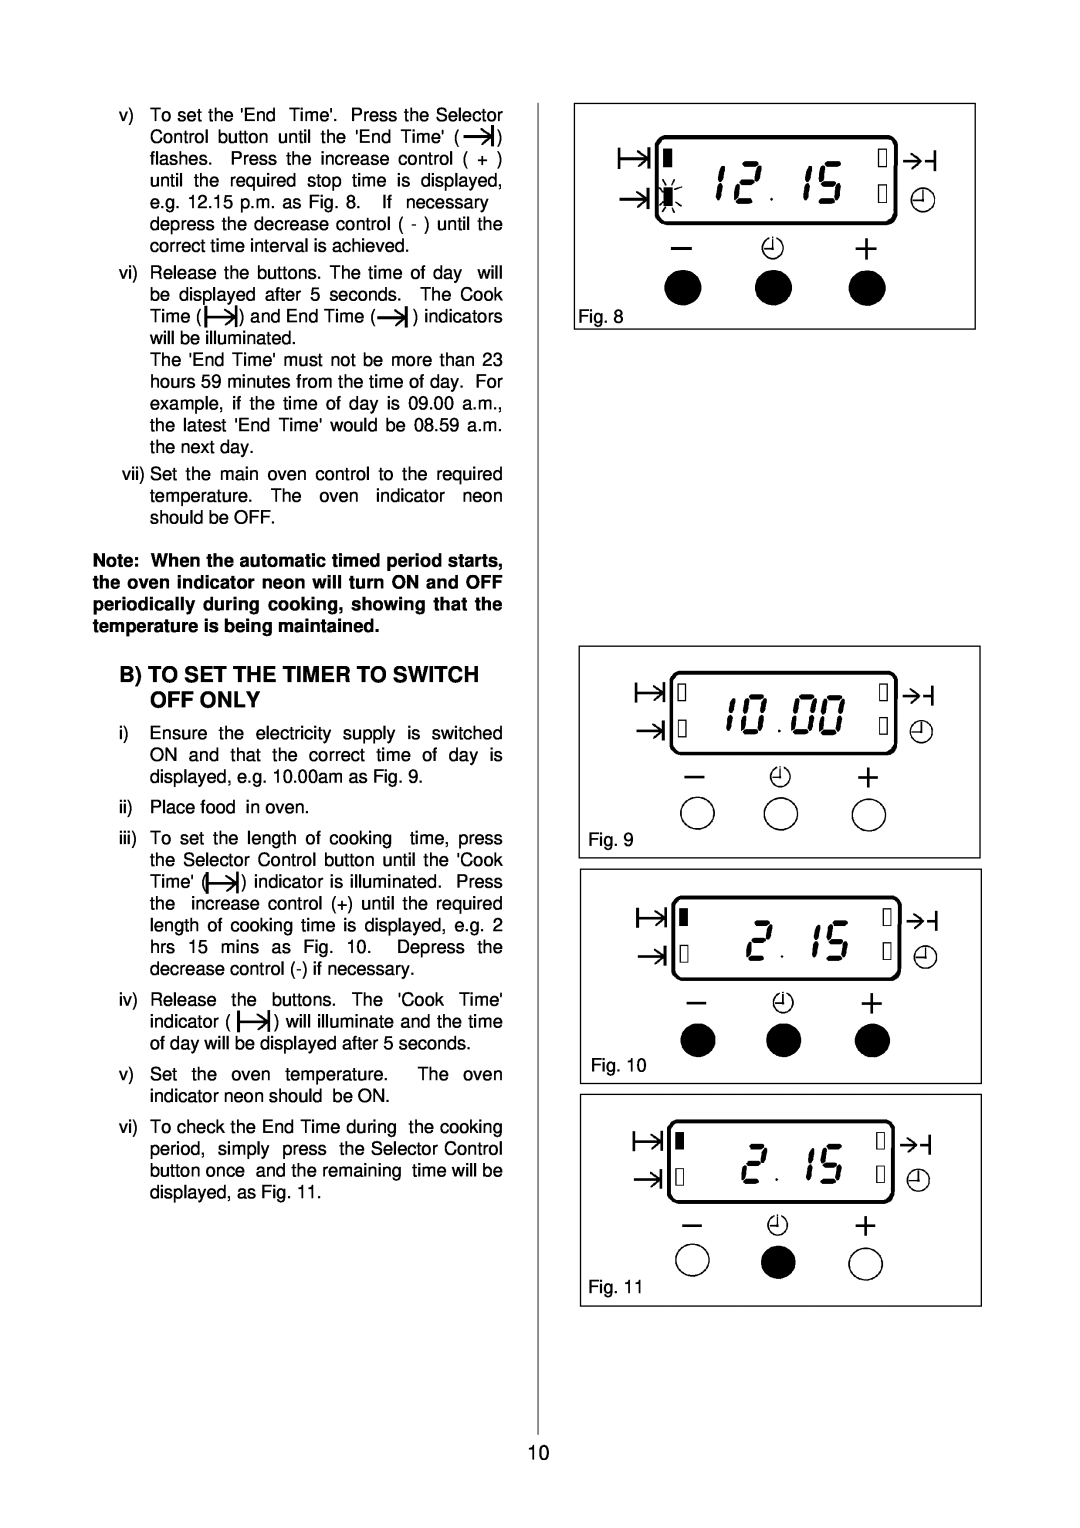 Electrolux D4100-1 operating instructions B To Set The Timer To Switch Off Only 